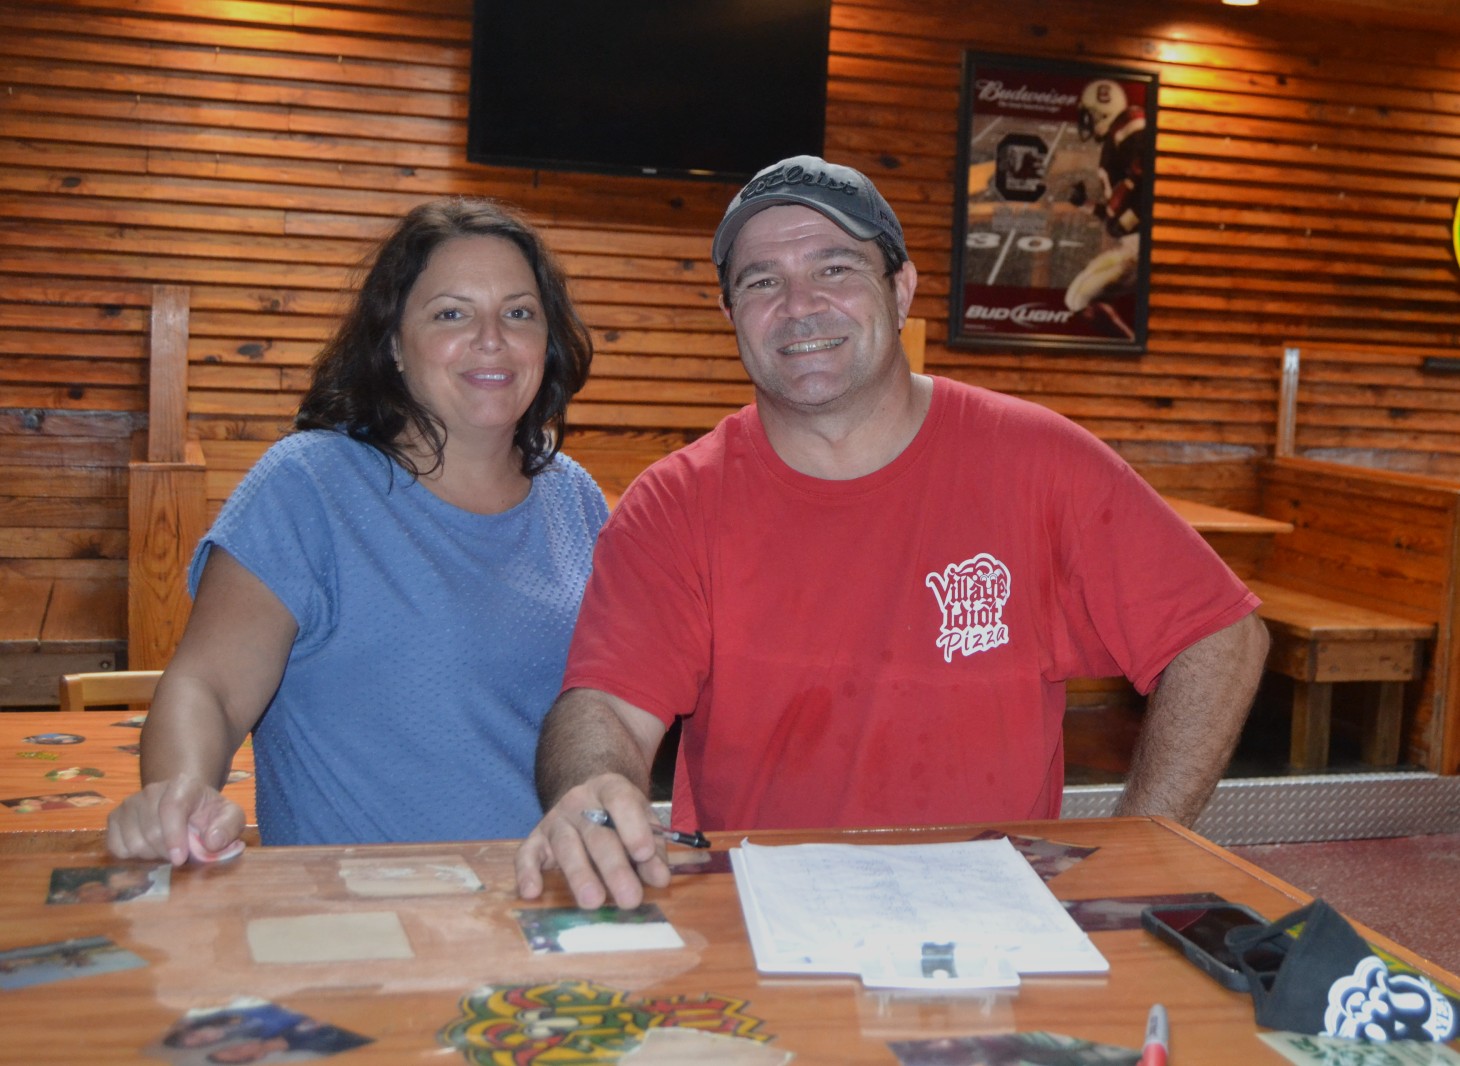 Brian and Kelly Glynn, owners of local landmark Village Idiot Pizza, will be inducted into the Columbia Restaurant Hall of Fame in November. (Photo/Melinda Waldrop)